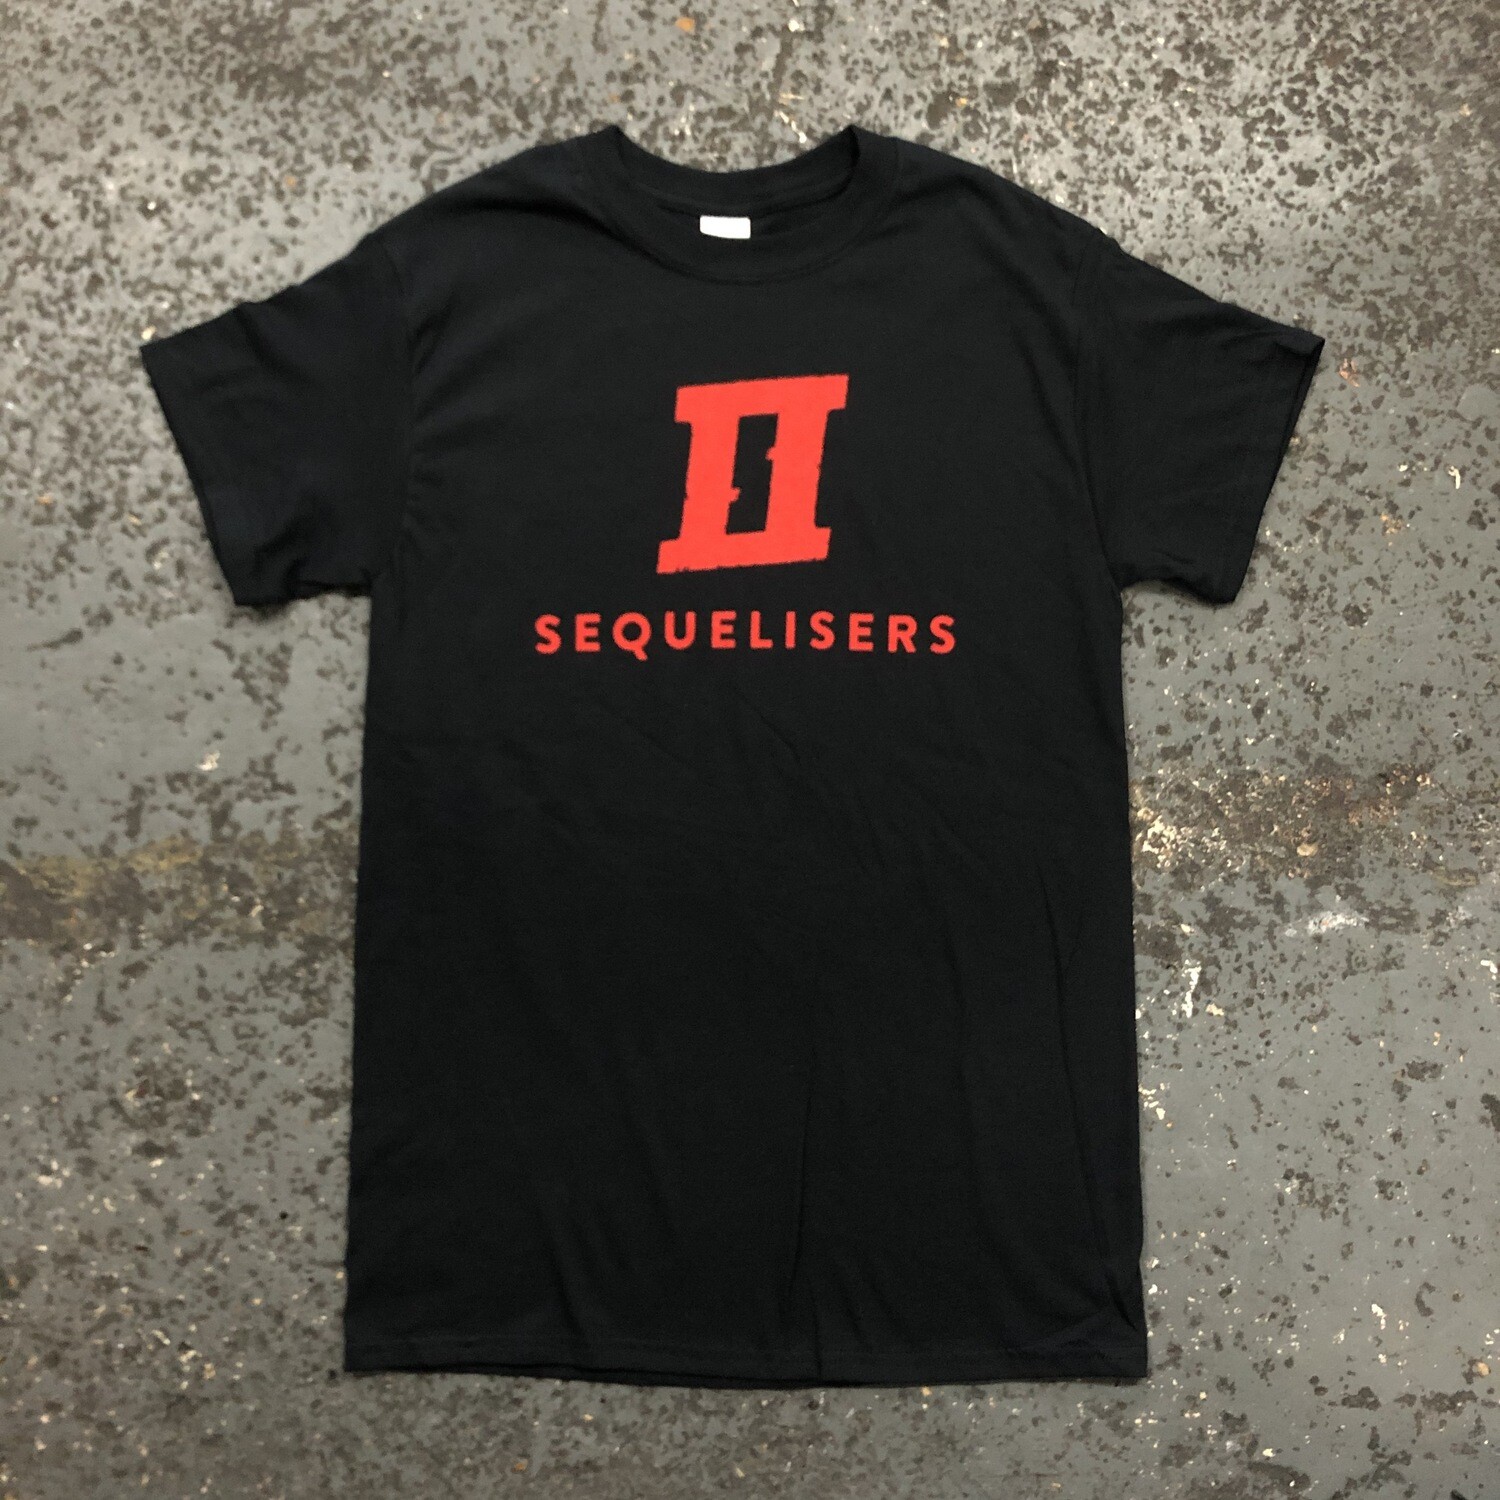 Sequelisers - Red Logo - Large